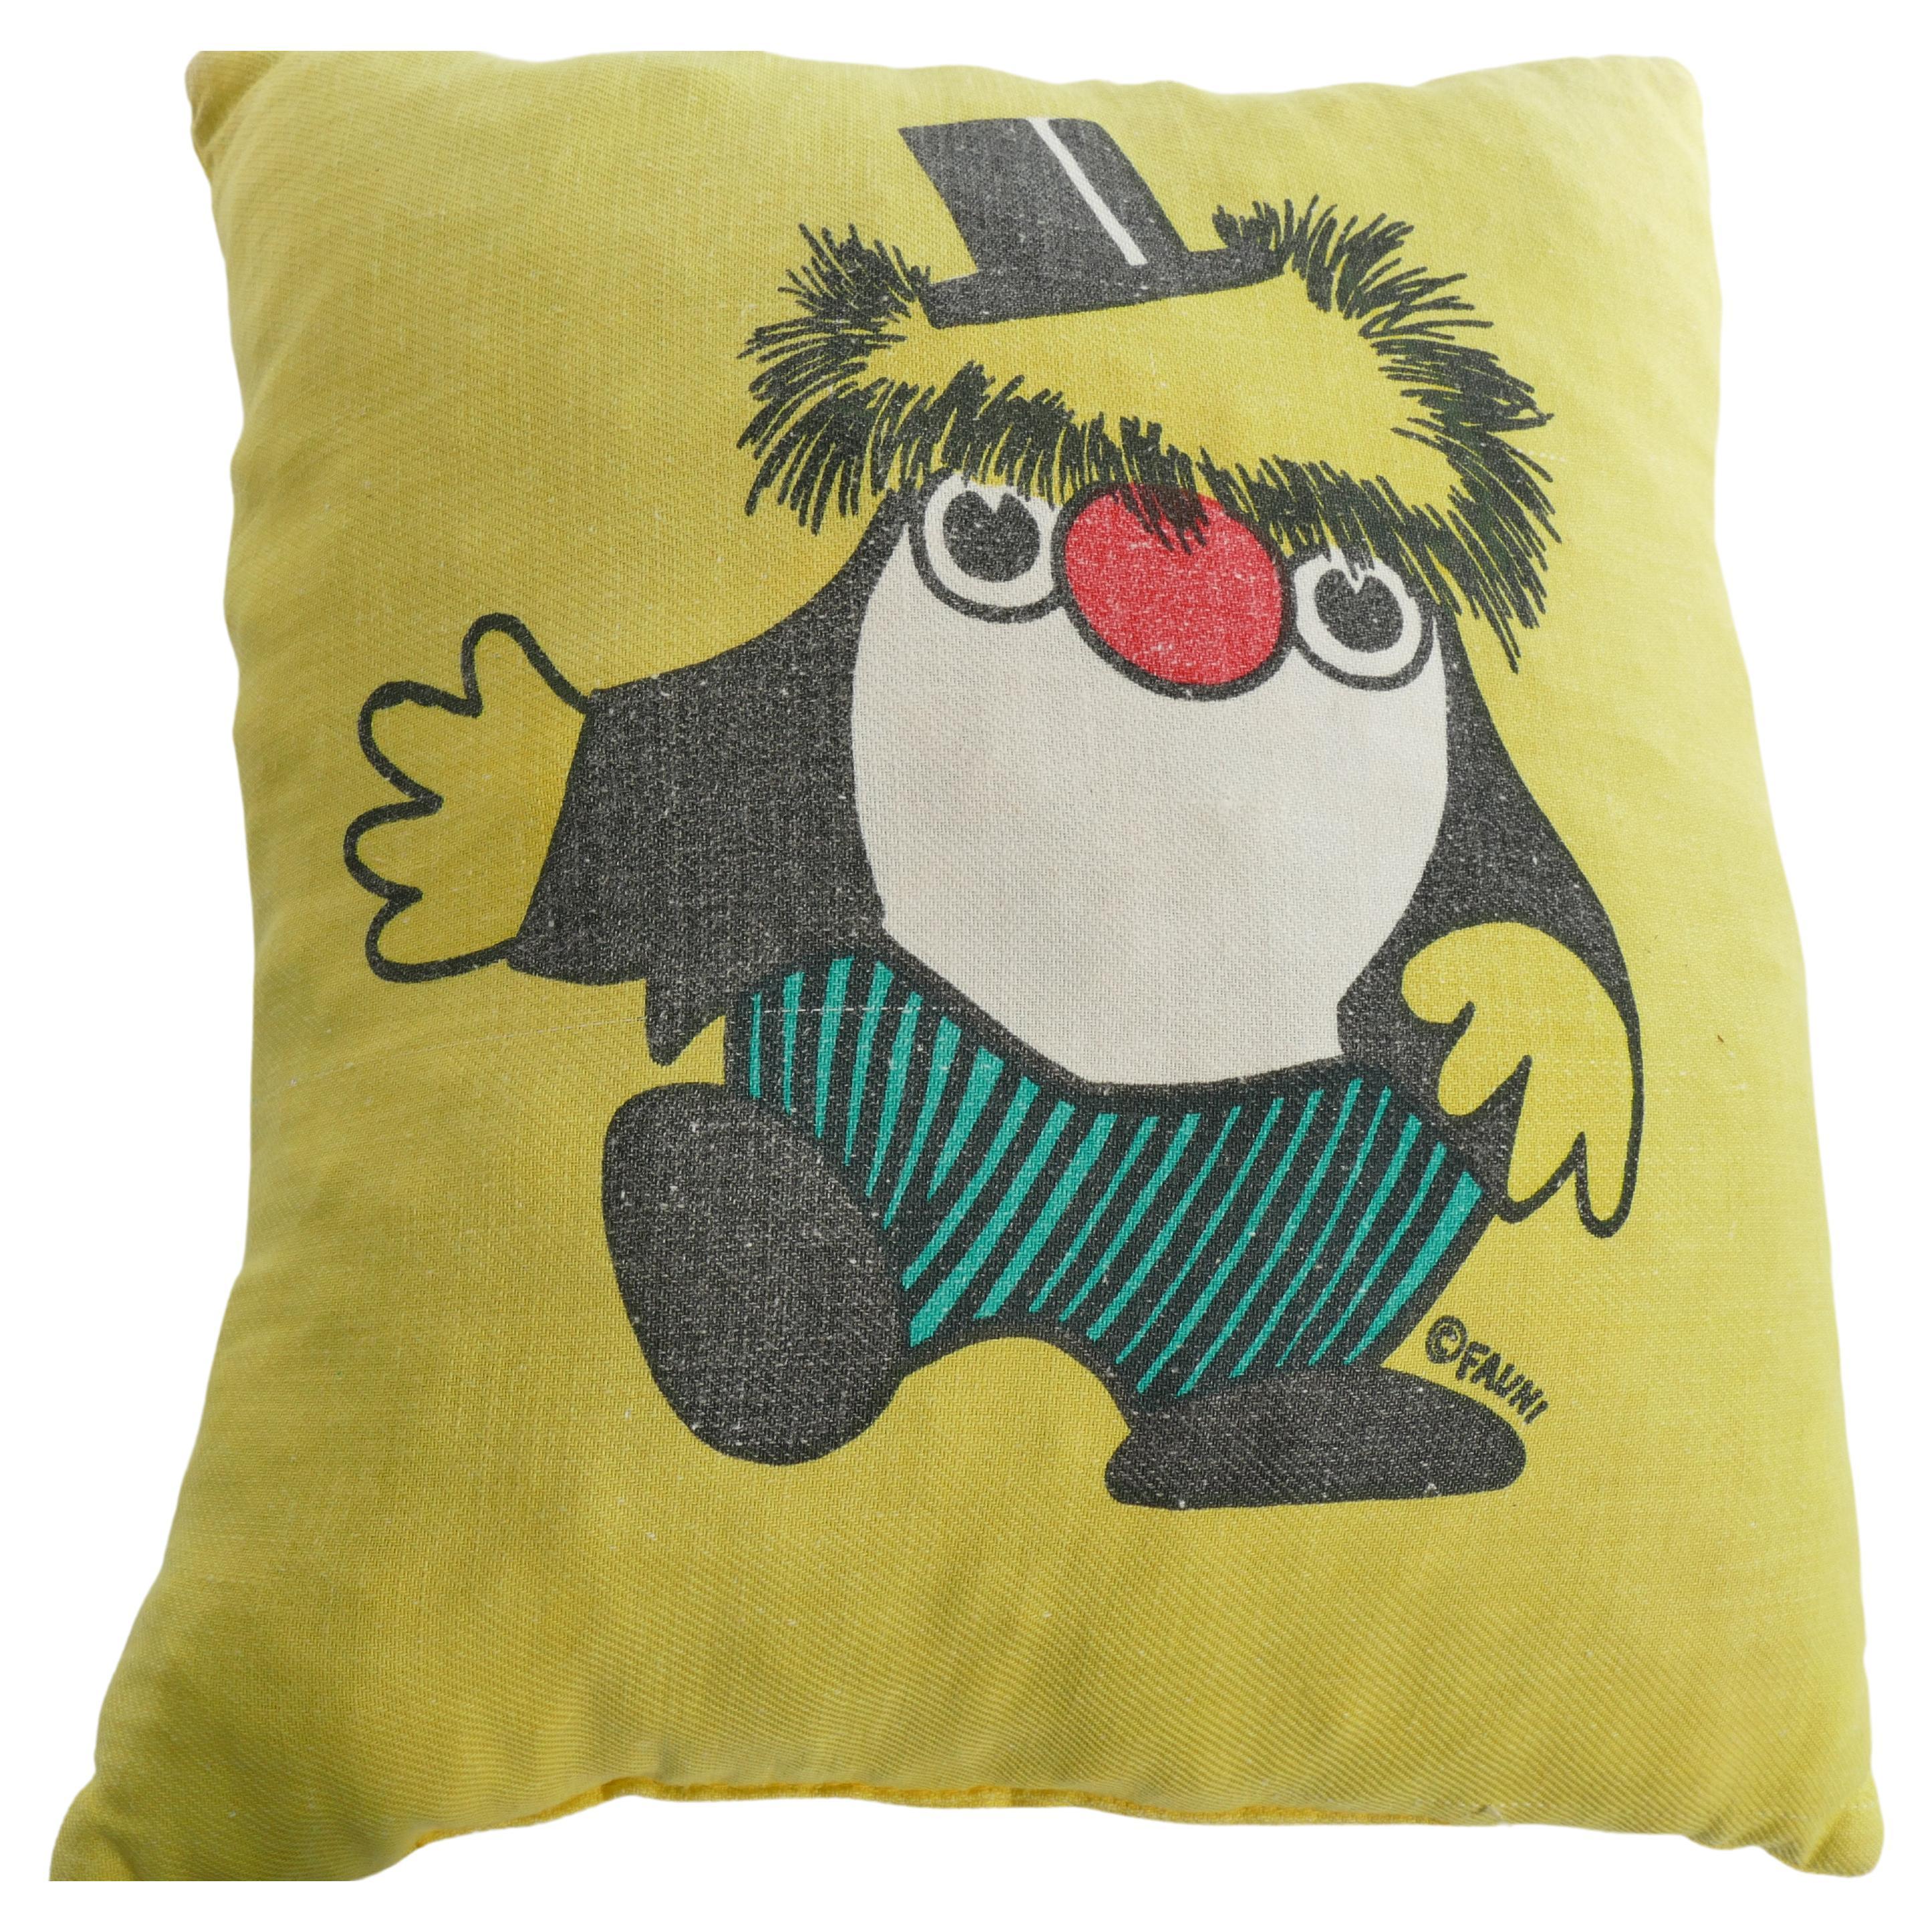 1970’s Atelier Fauni Yellow  Pillow Depicting Mr Edward the Business Troll  For Sale